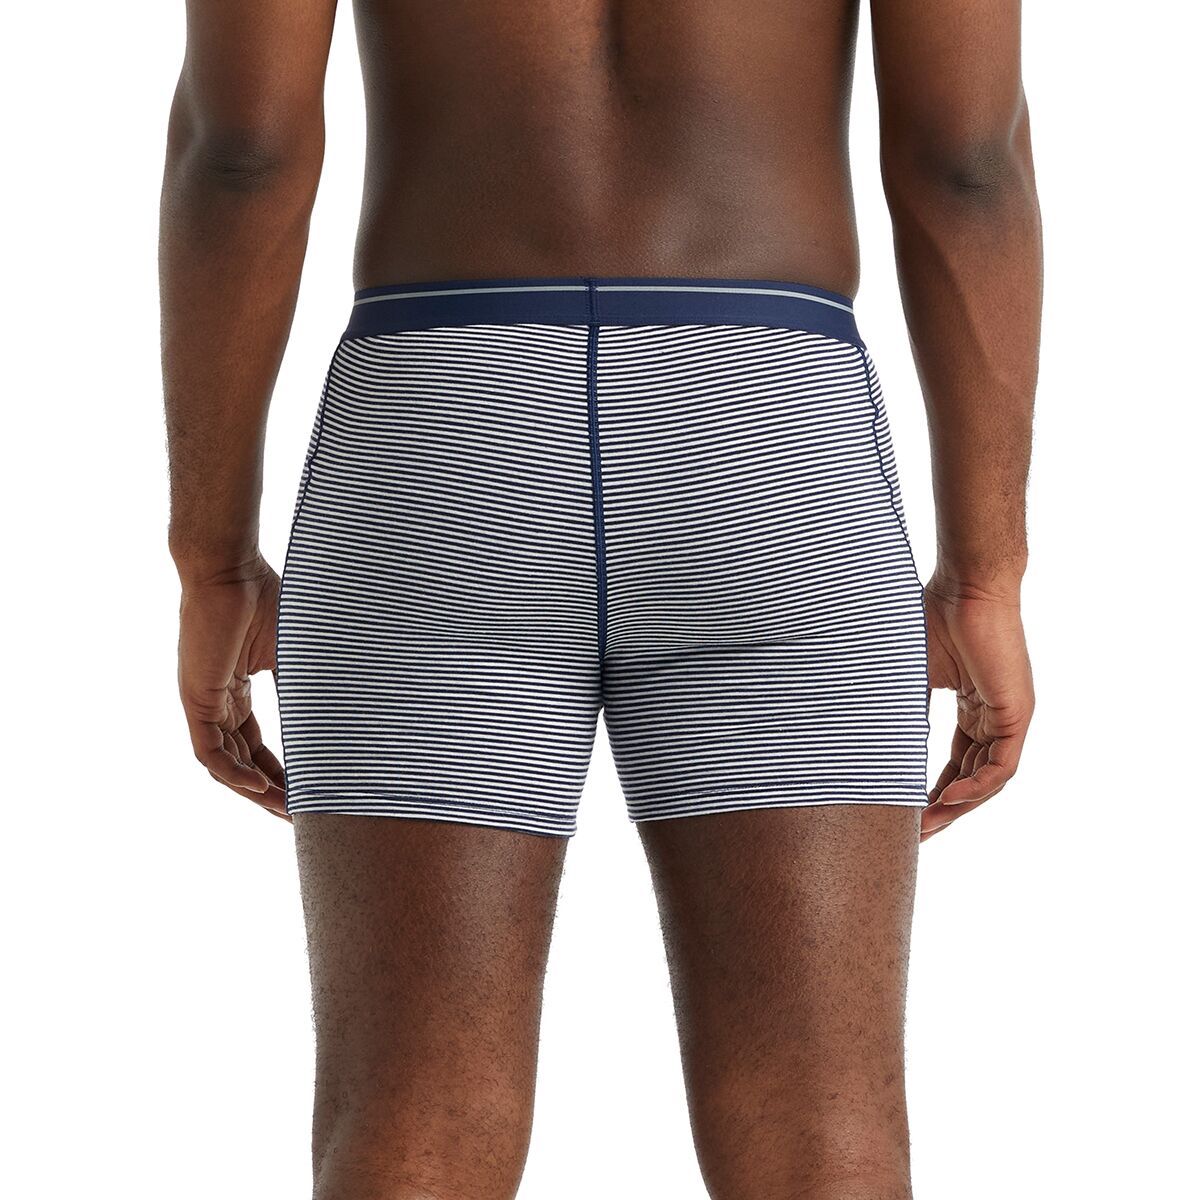 Icebreaker Anatomica Boxers with Fly